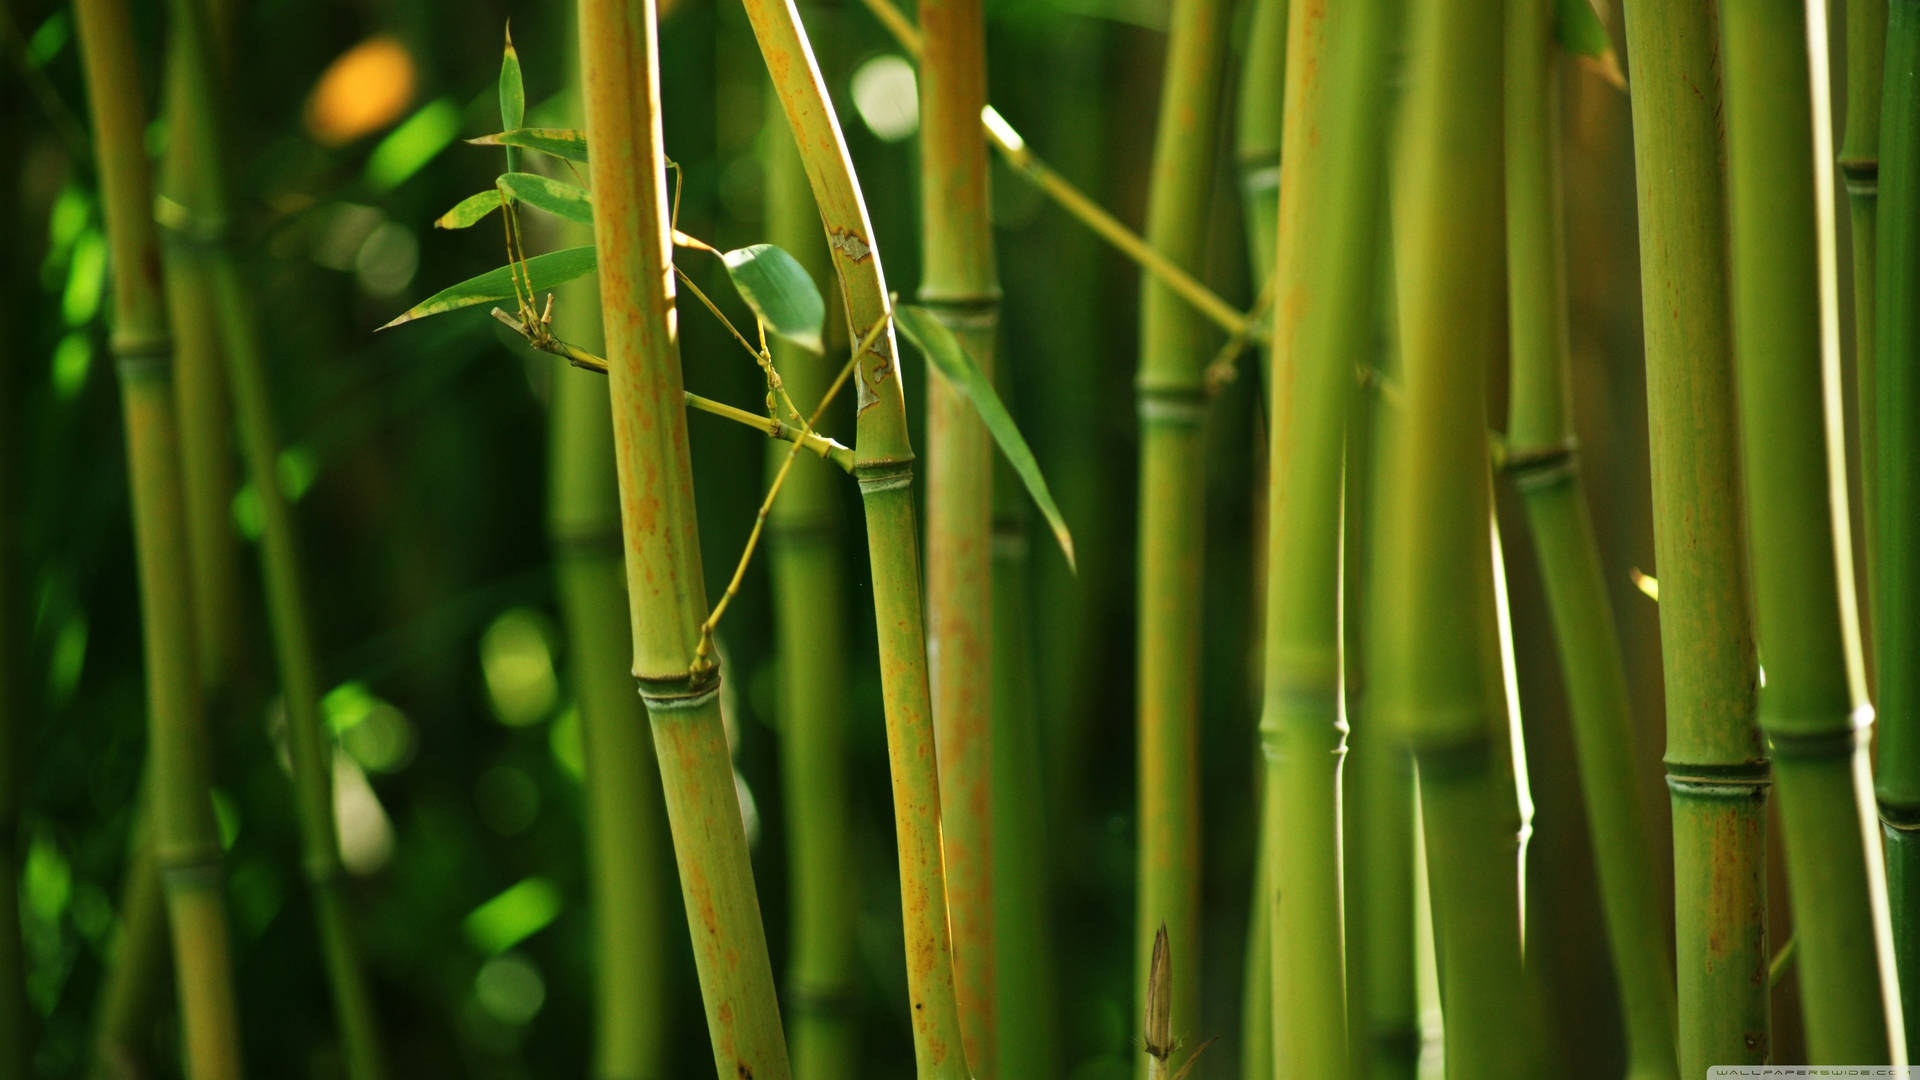 Bamboo 4k Tree With Small Leaves